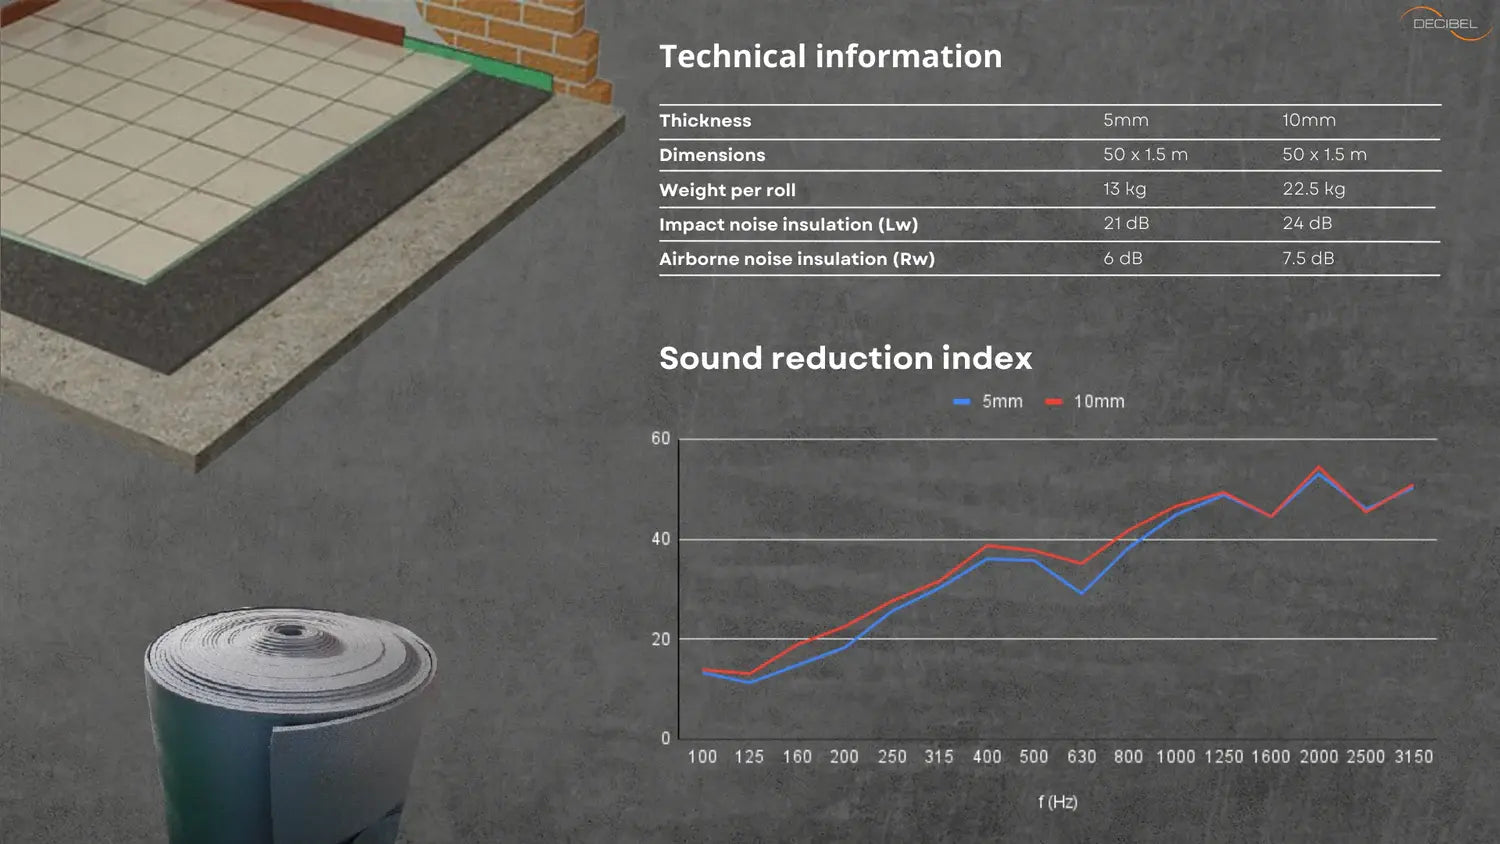 Dpact Soundproofing membrane for floor impact noise insulation chart